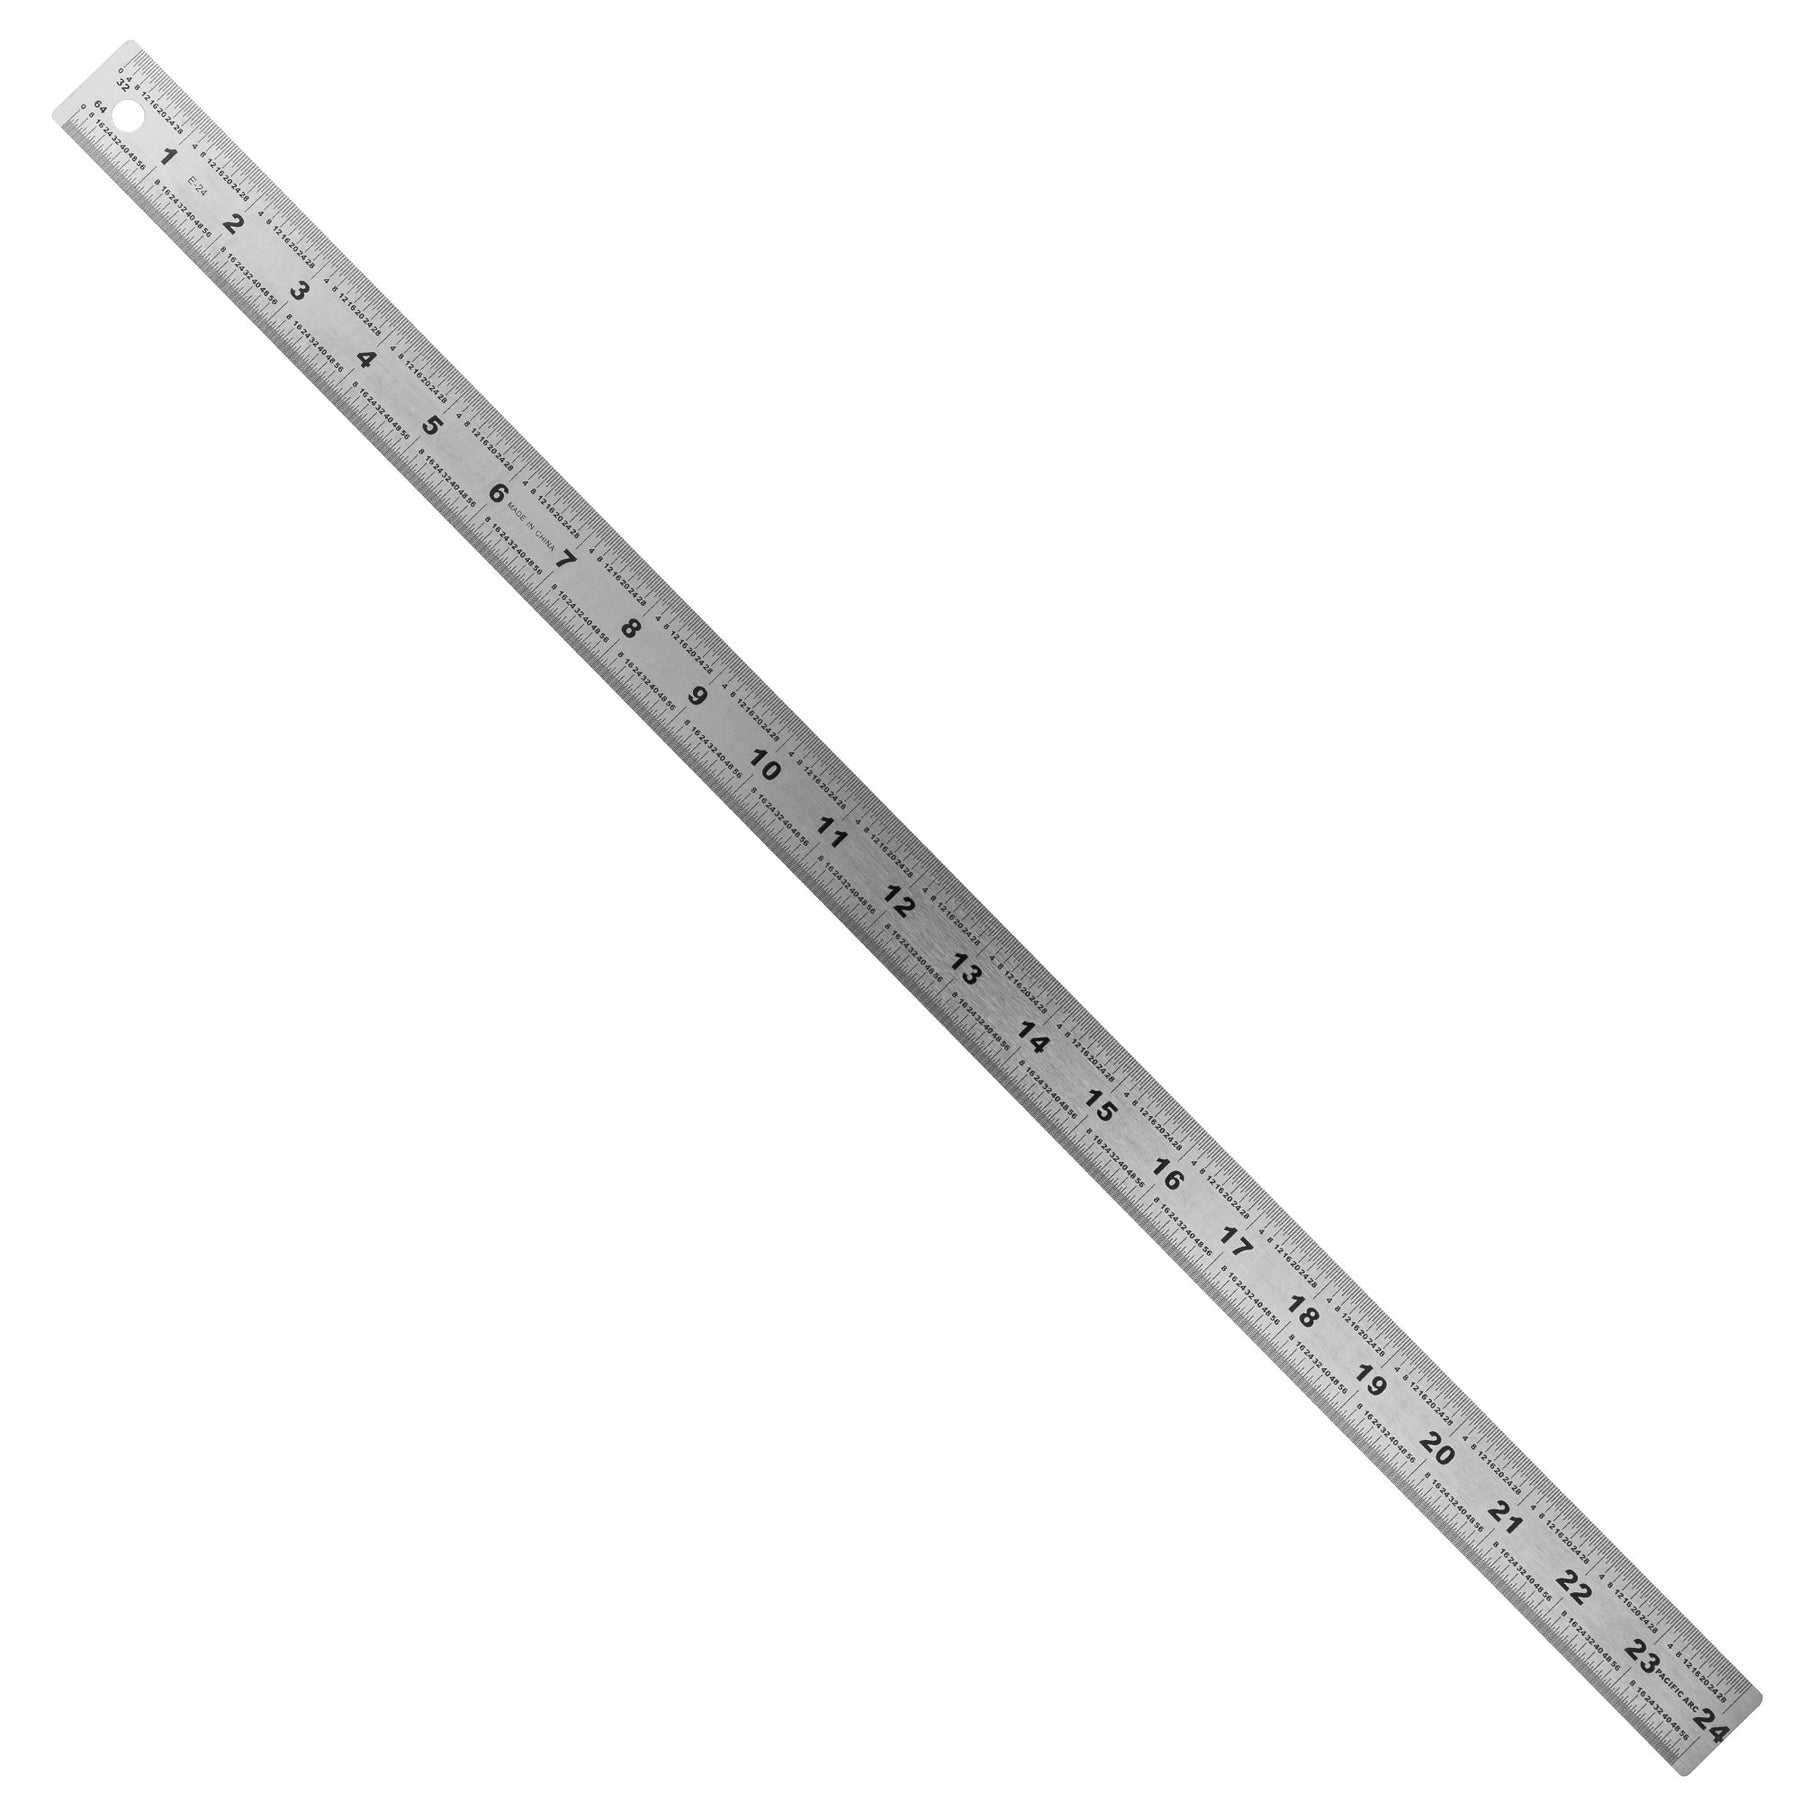 Pacific Arc Stainless Steel Ruler Non Skid, Cork or Rubber Back